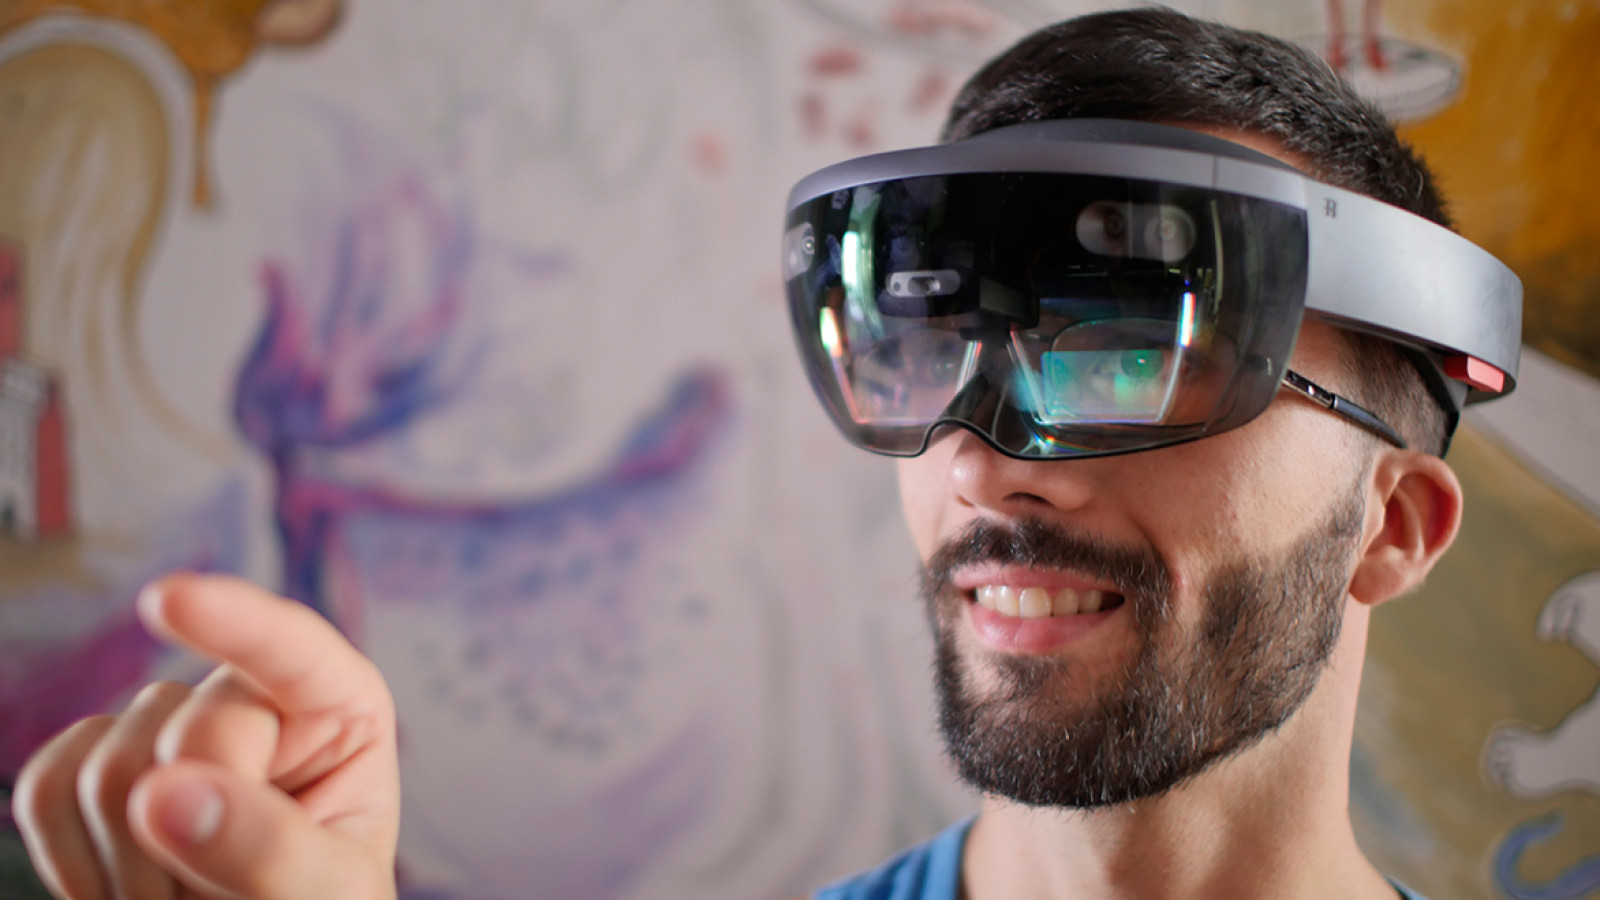 New Realities: From Augmented Reality to Virtual Reality